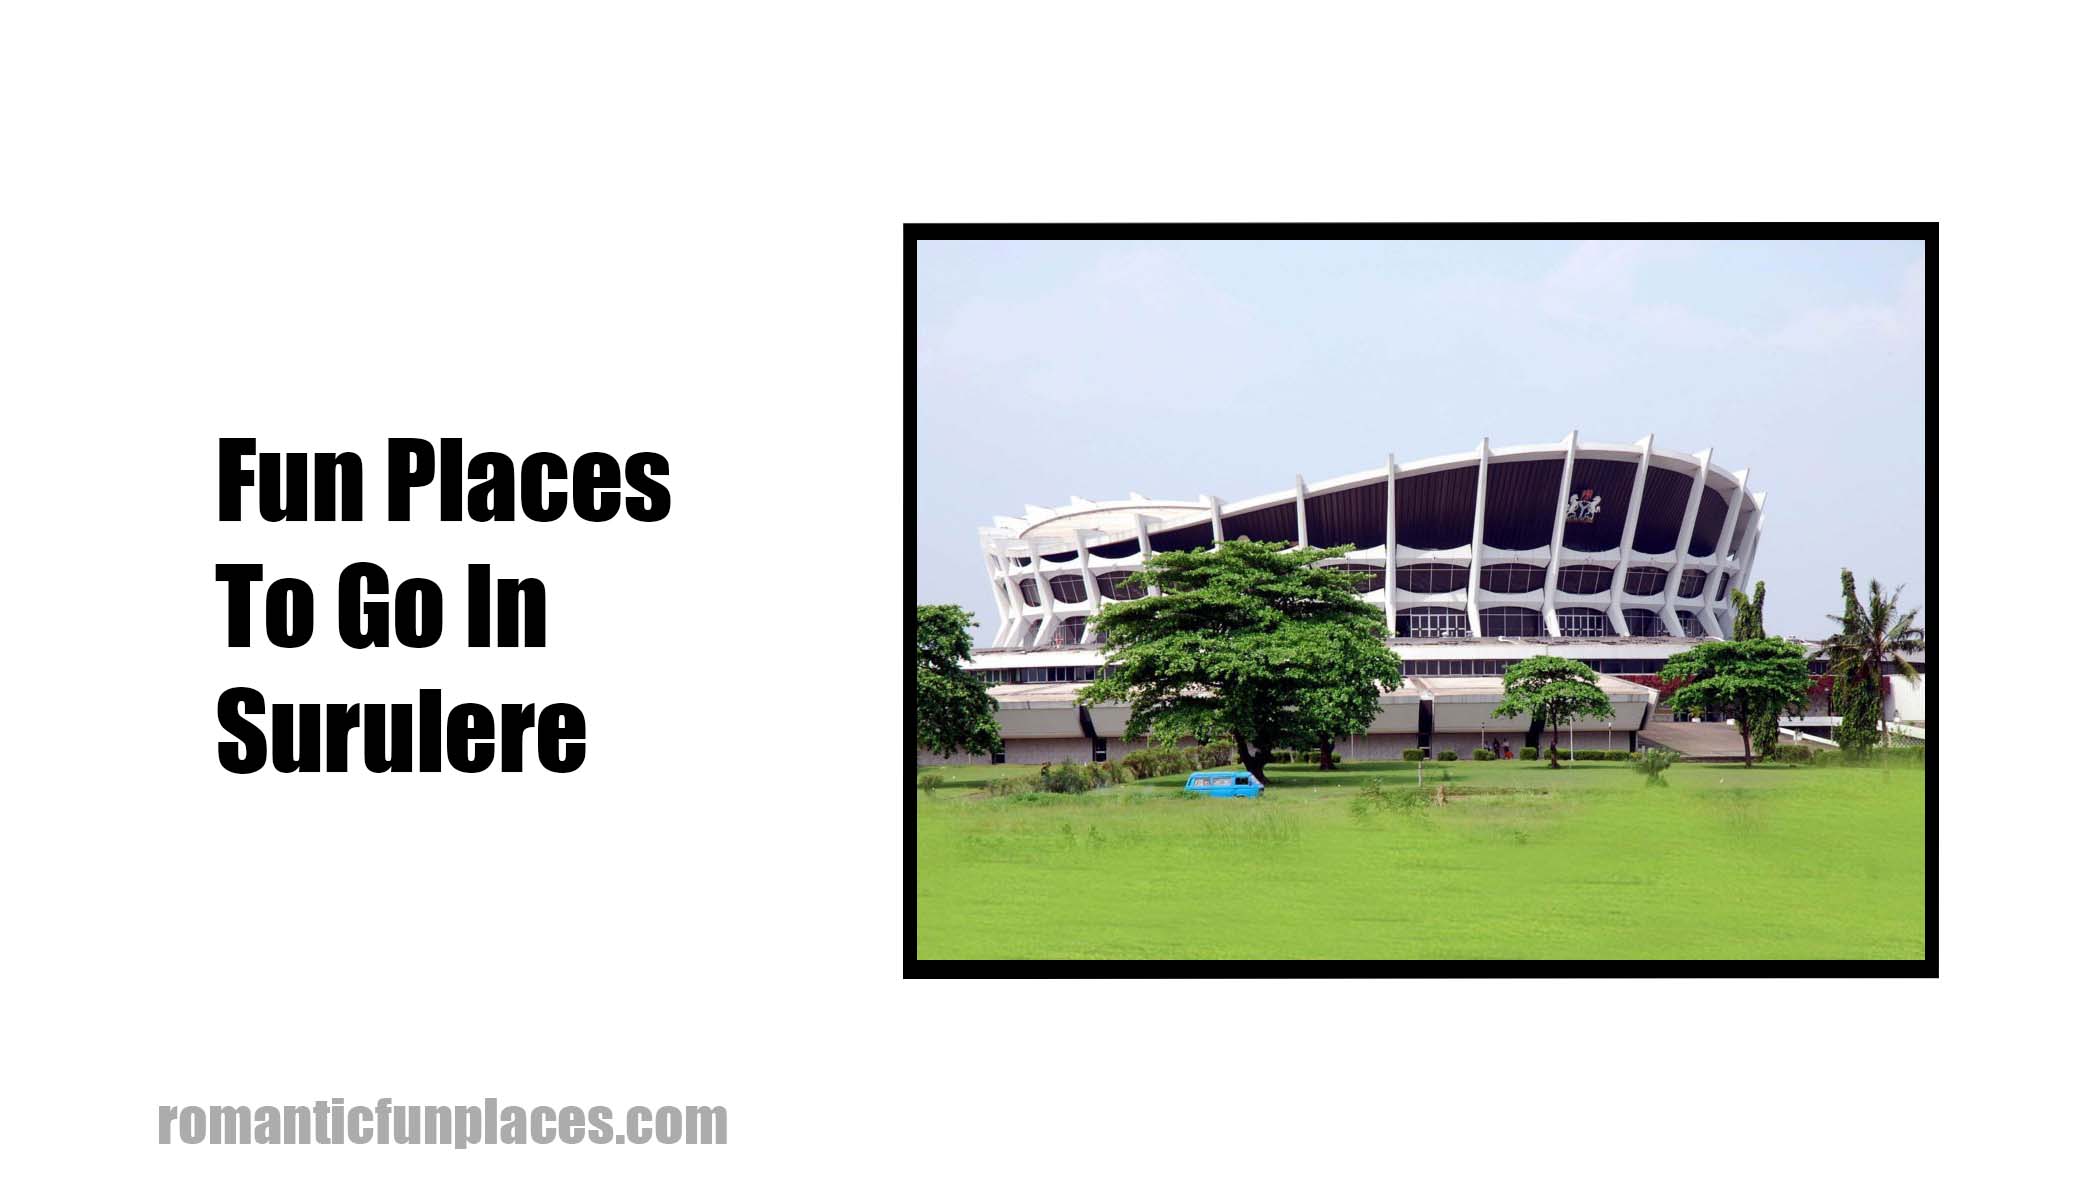 Fun Places To Go In Surulere